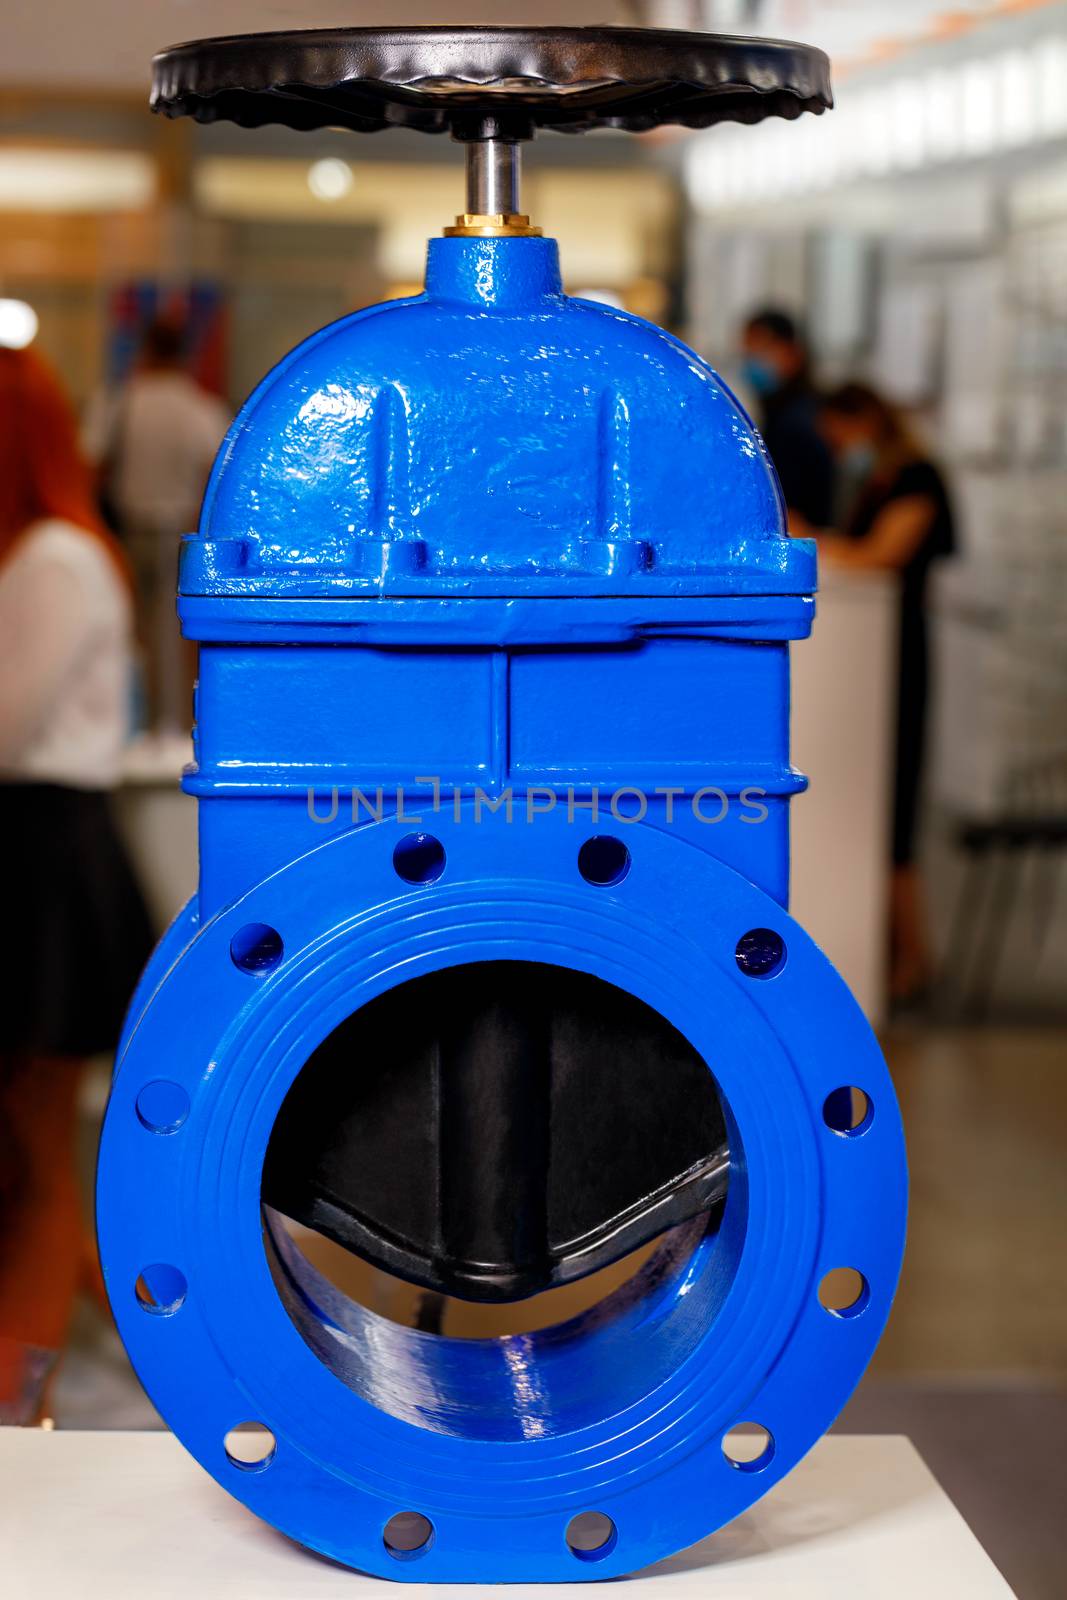 Industrial shut-off valve of large diameter with a rubberized wedge as a locking device to prevent further movement of the flow of cold or hot water.